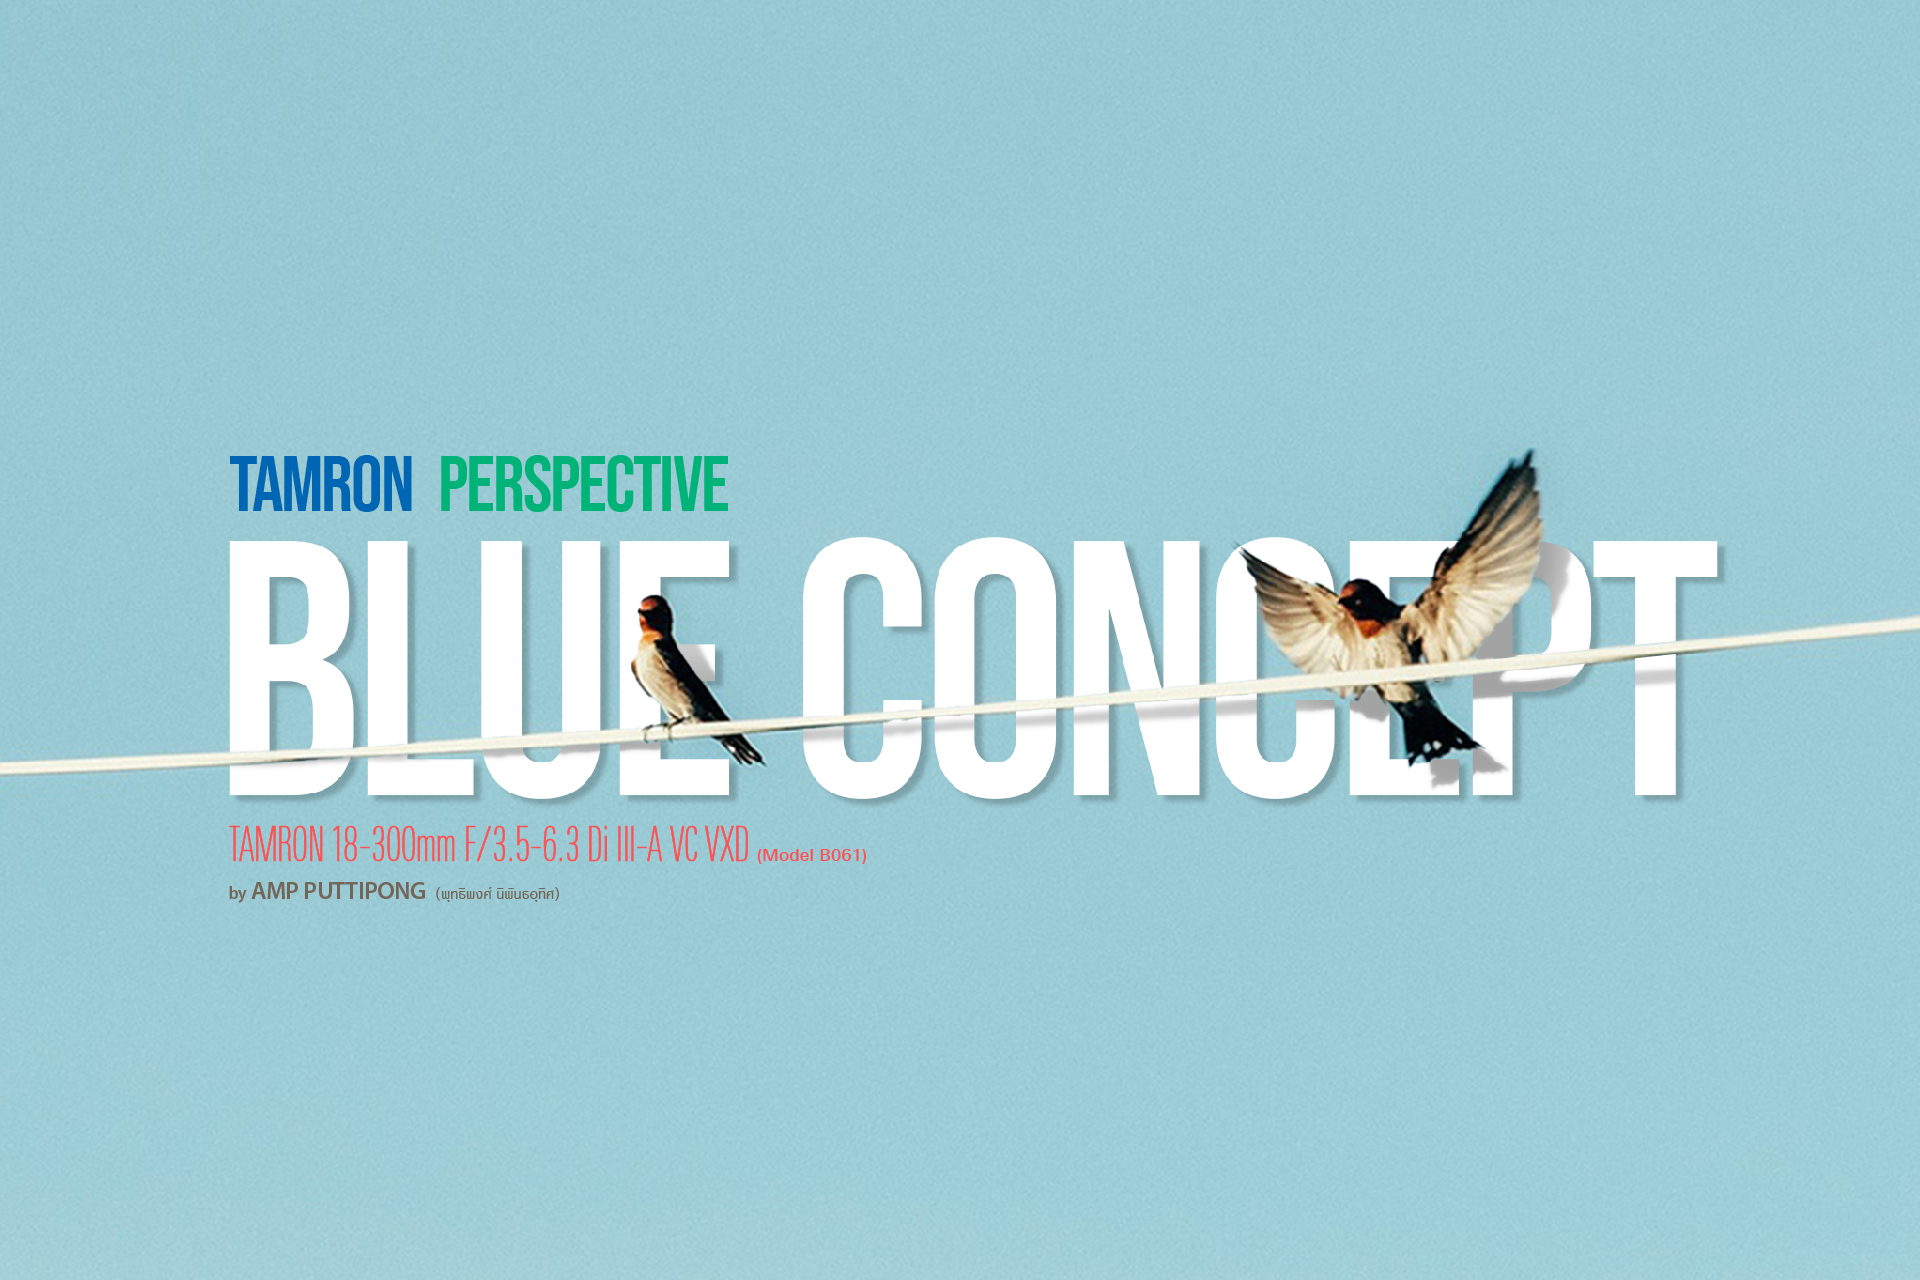 TAMRON PERSPECTIVE : BLUE CONCEPT by AMP PUTTIPONG